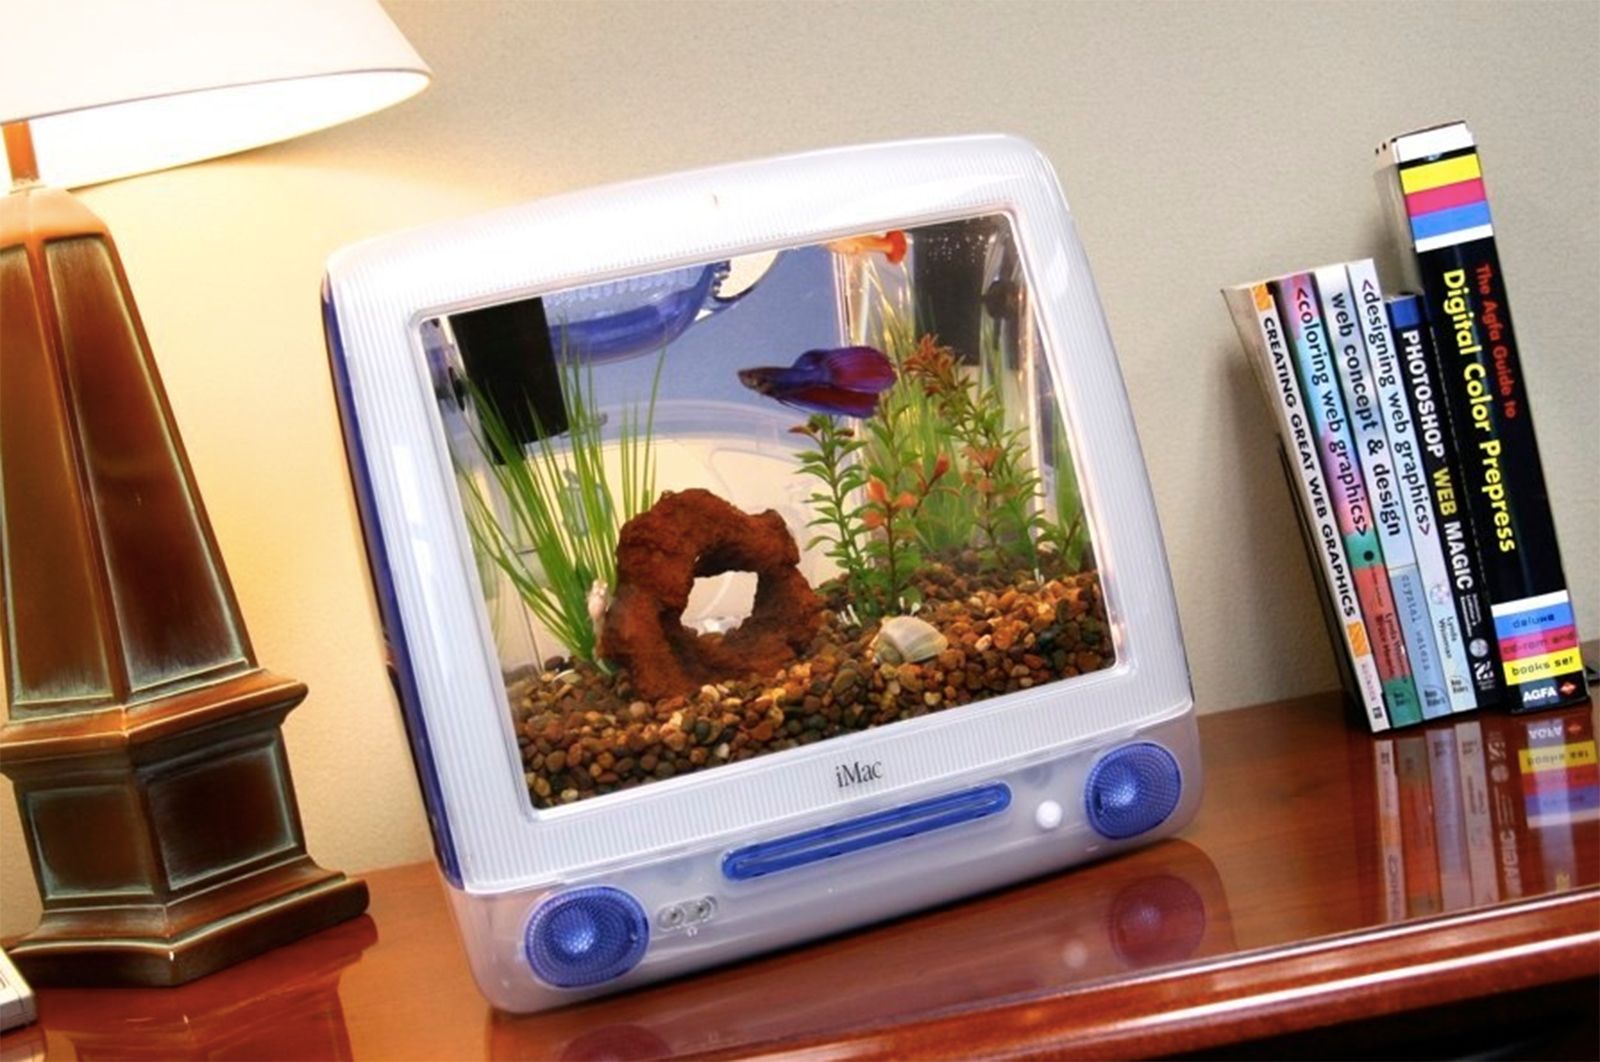 turn an old apple imac into an aquarium yourself or buy one ready to go image 1